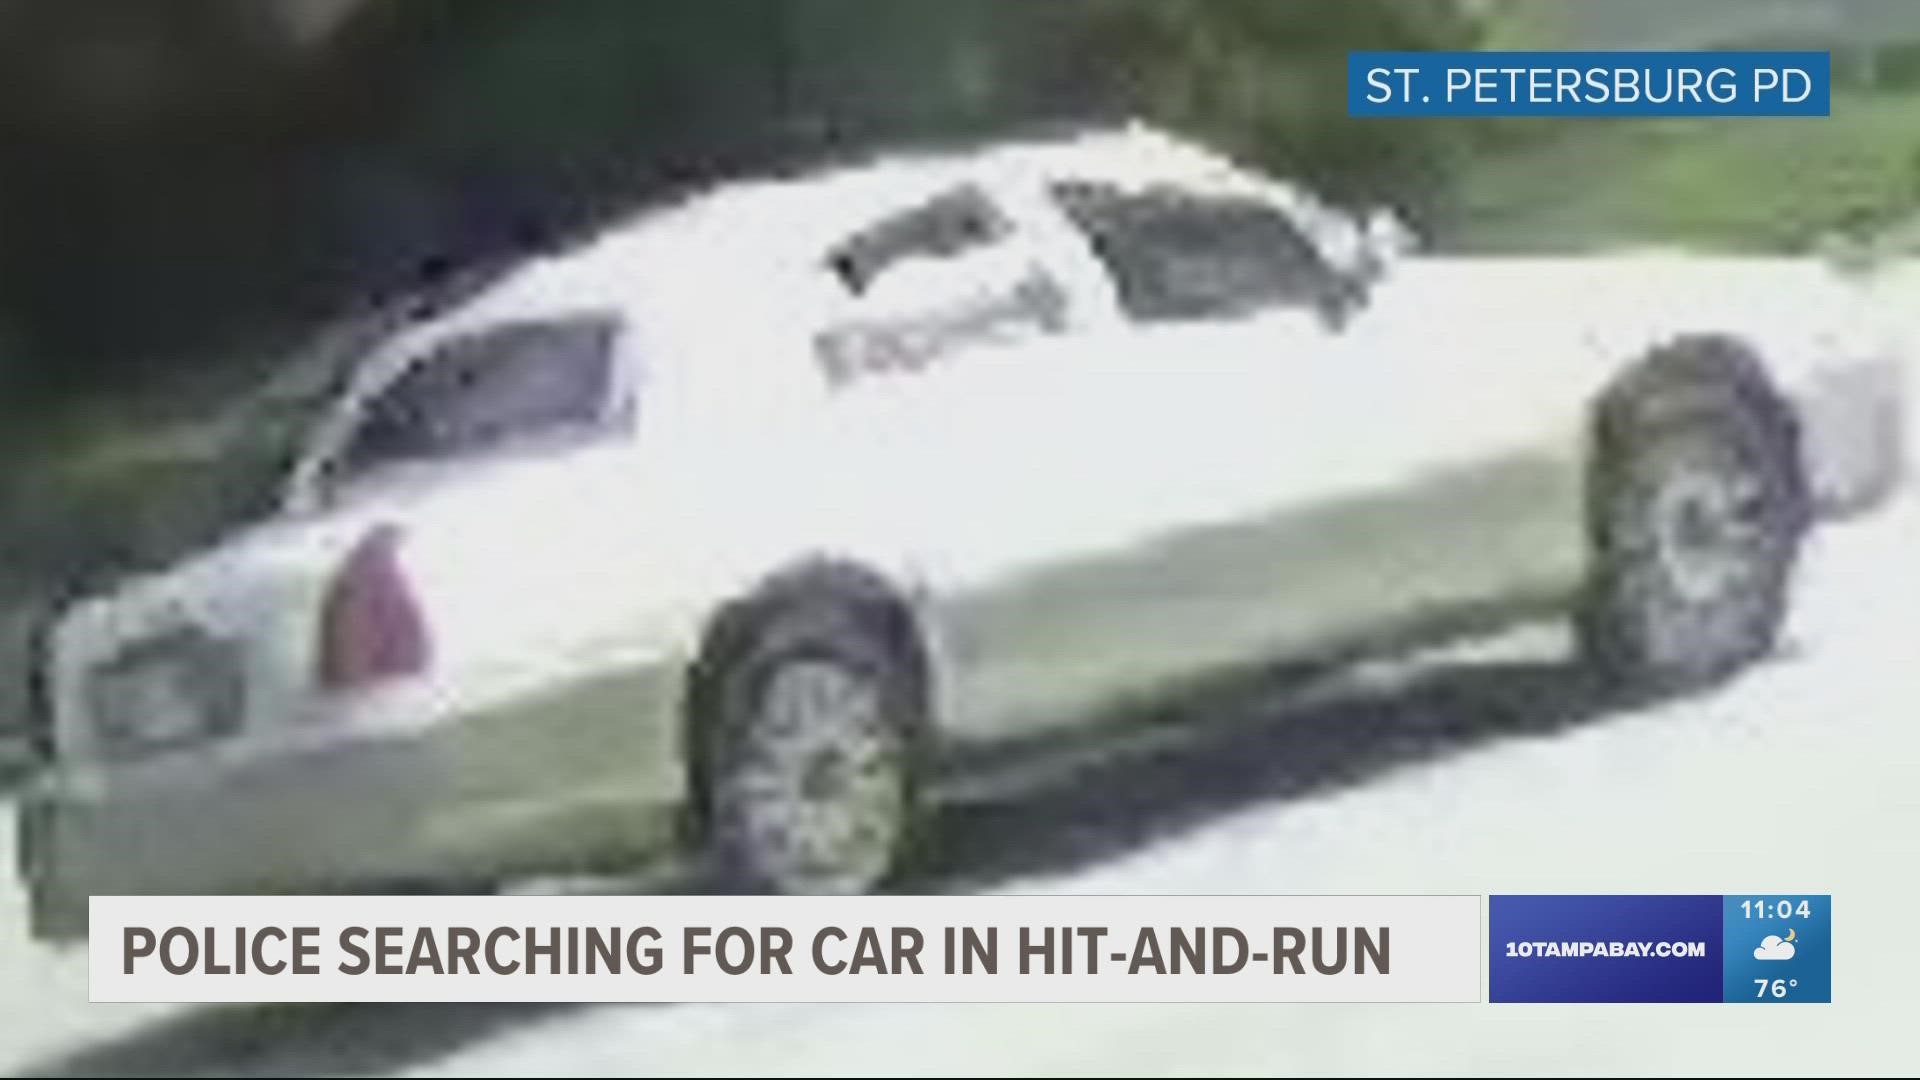 Authorities say they are looking for a white Lincoln Mercury sedan.